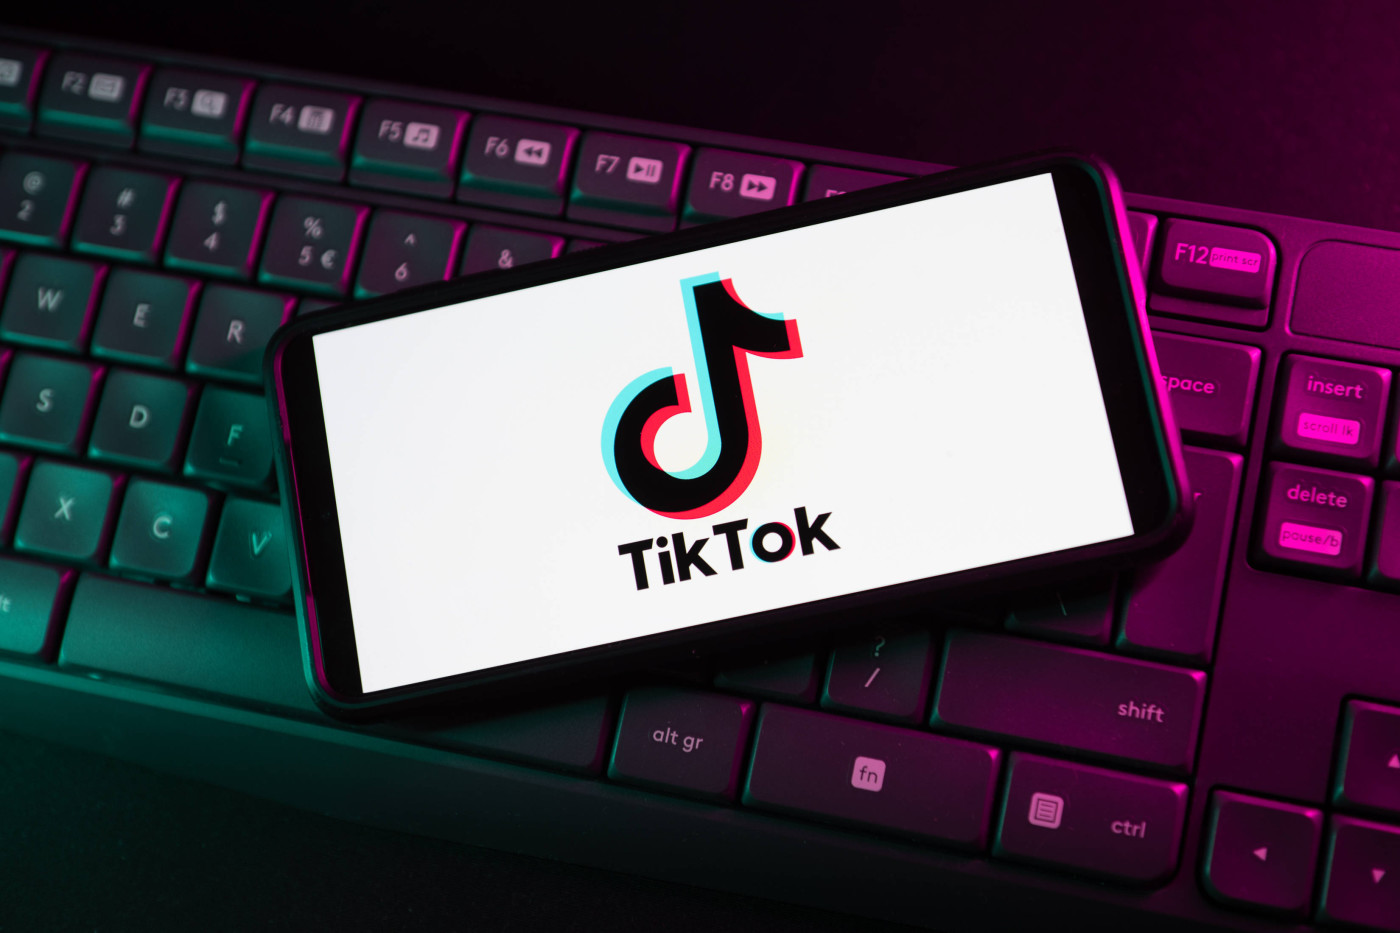 The United States threatens to ban TikTok if its parent company does not sell its shares